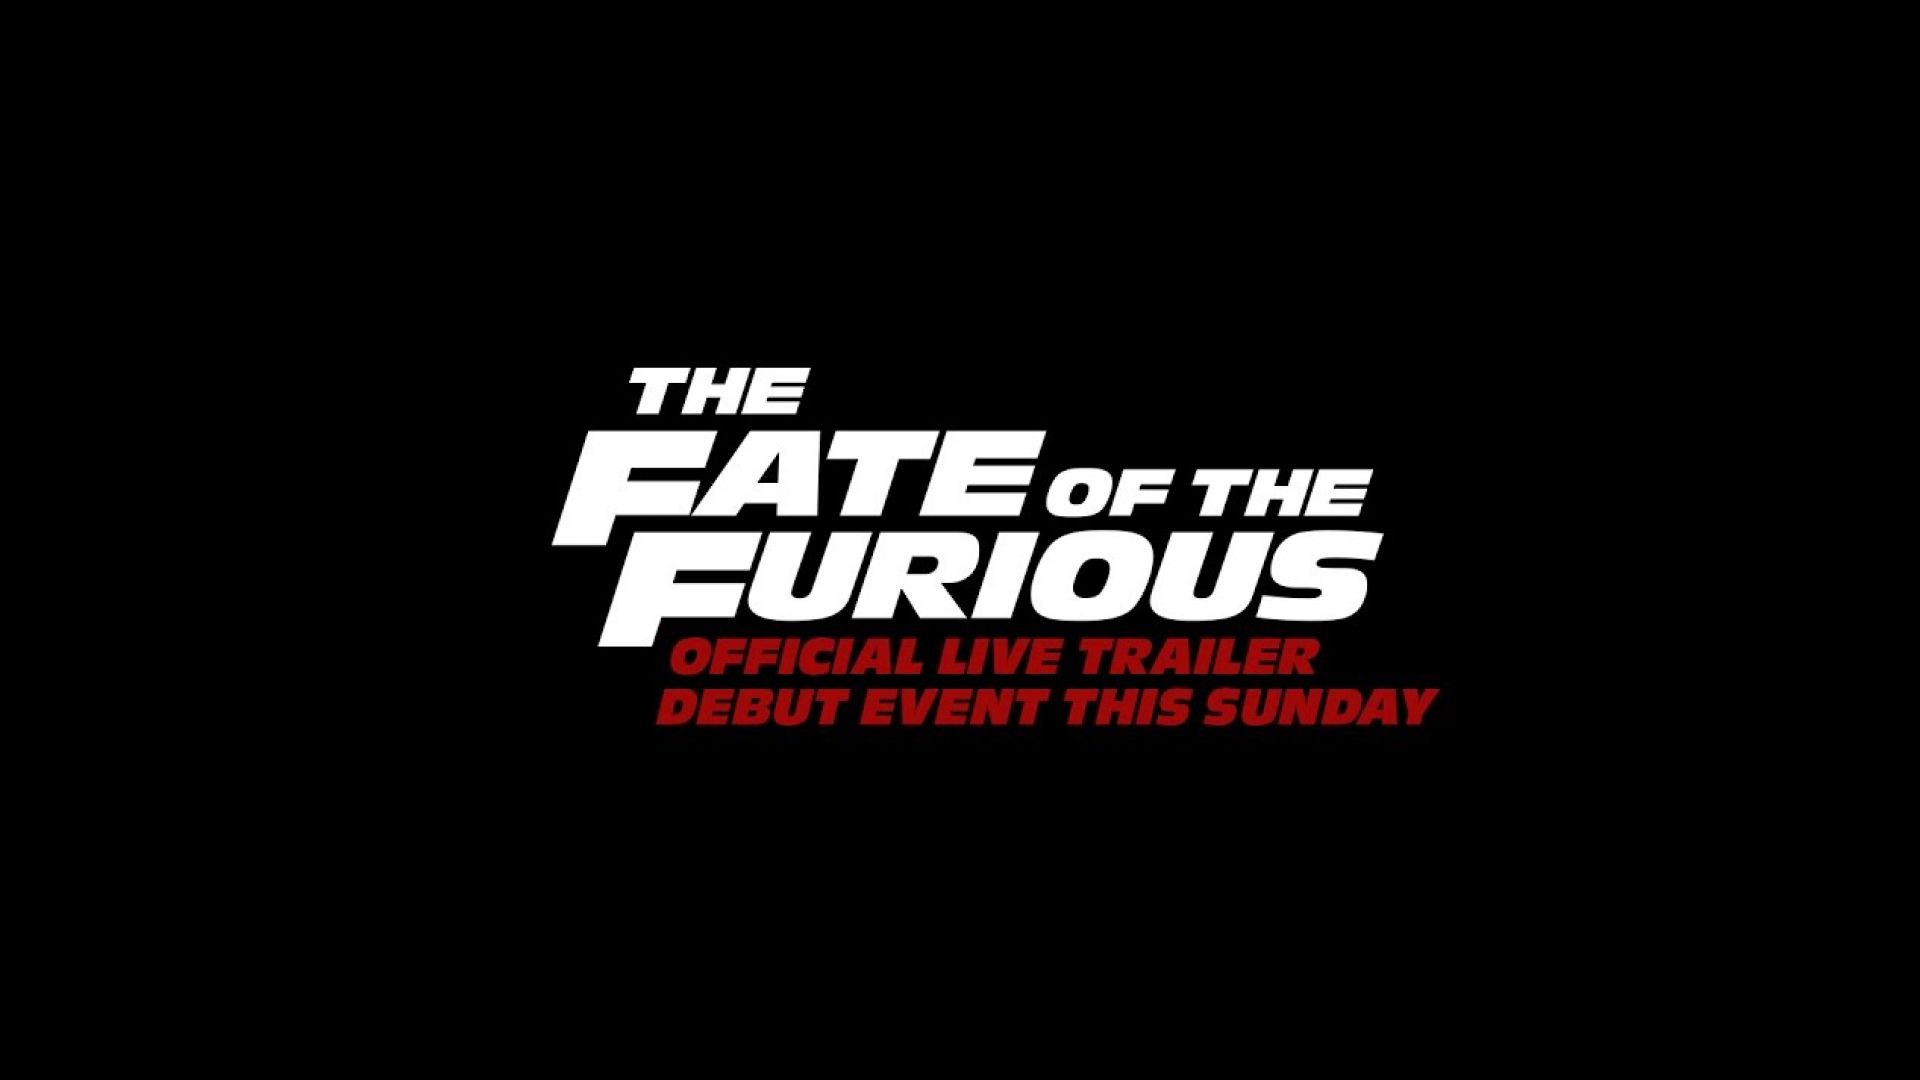 Trailer tease reveals the new title of &#039;Fast 8&#039; - &#039;The Fate 